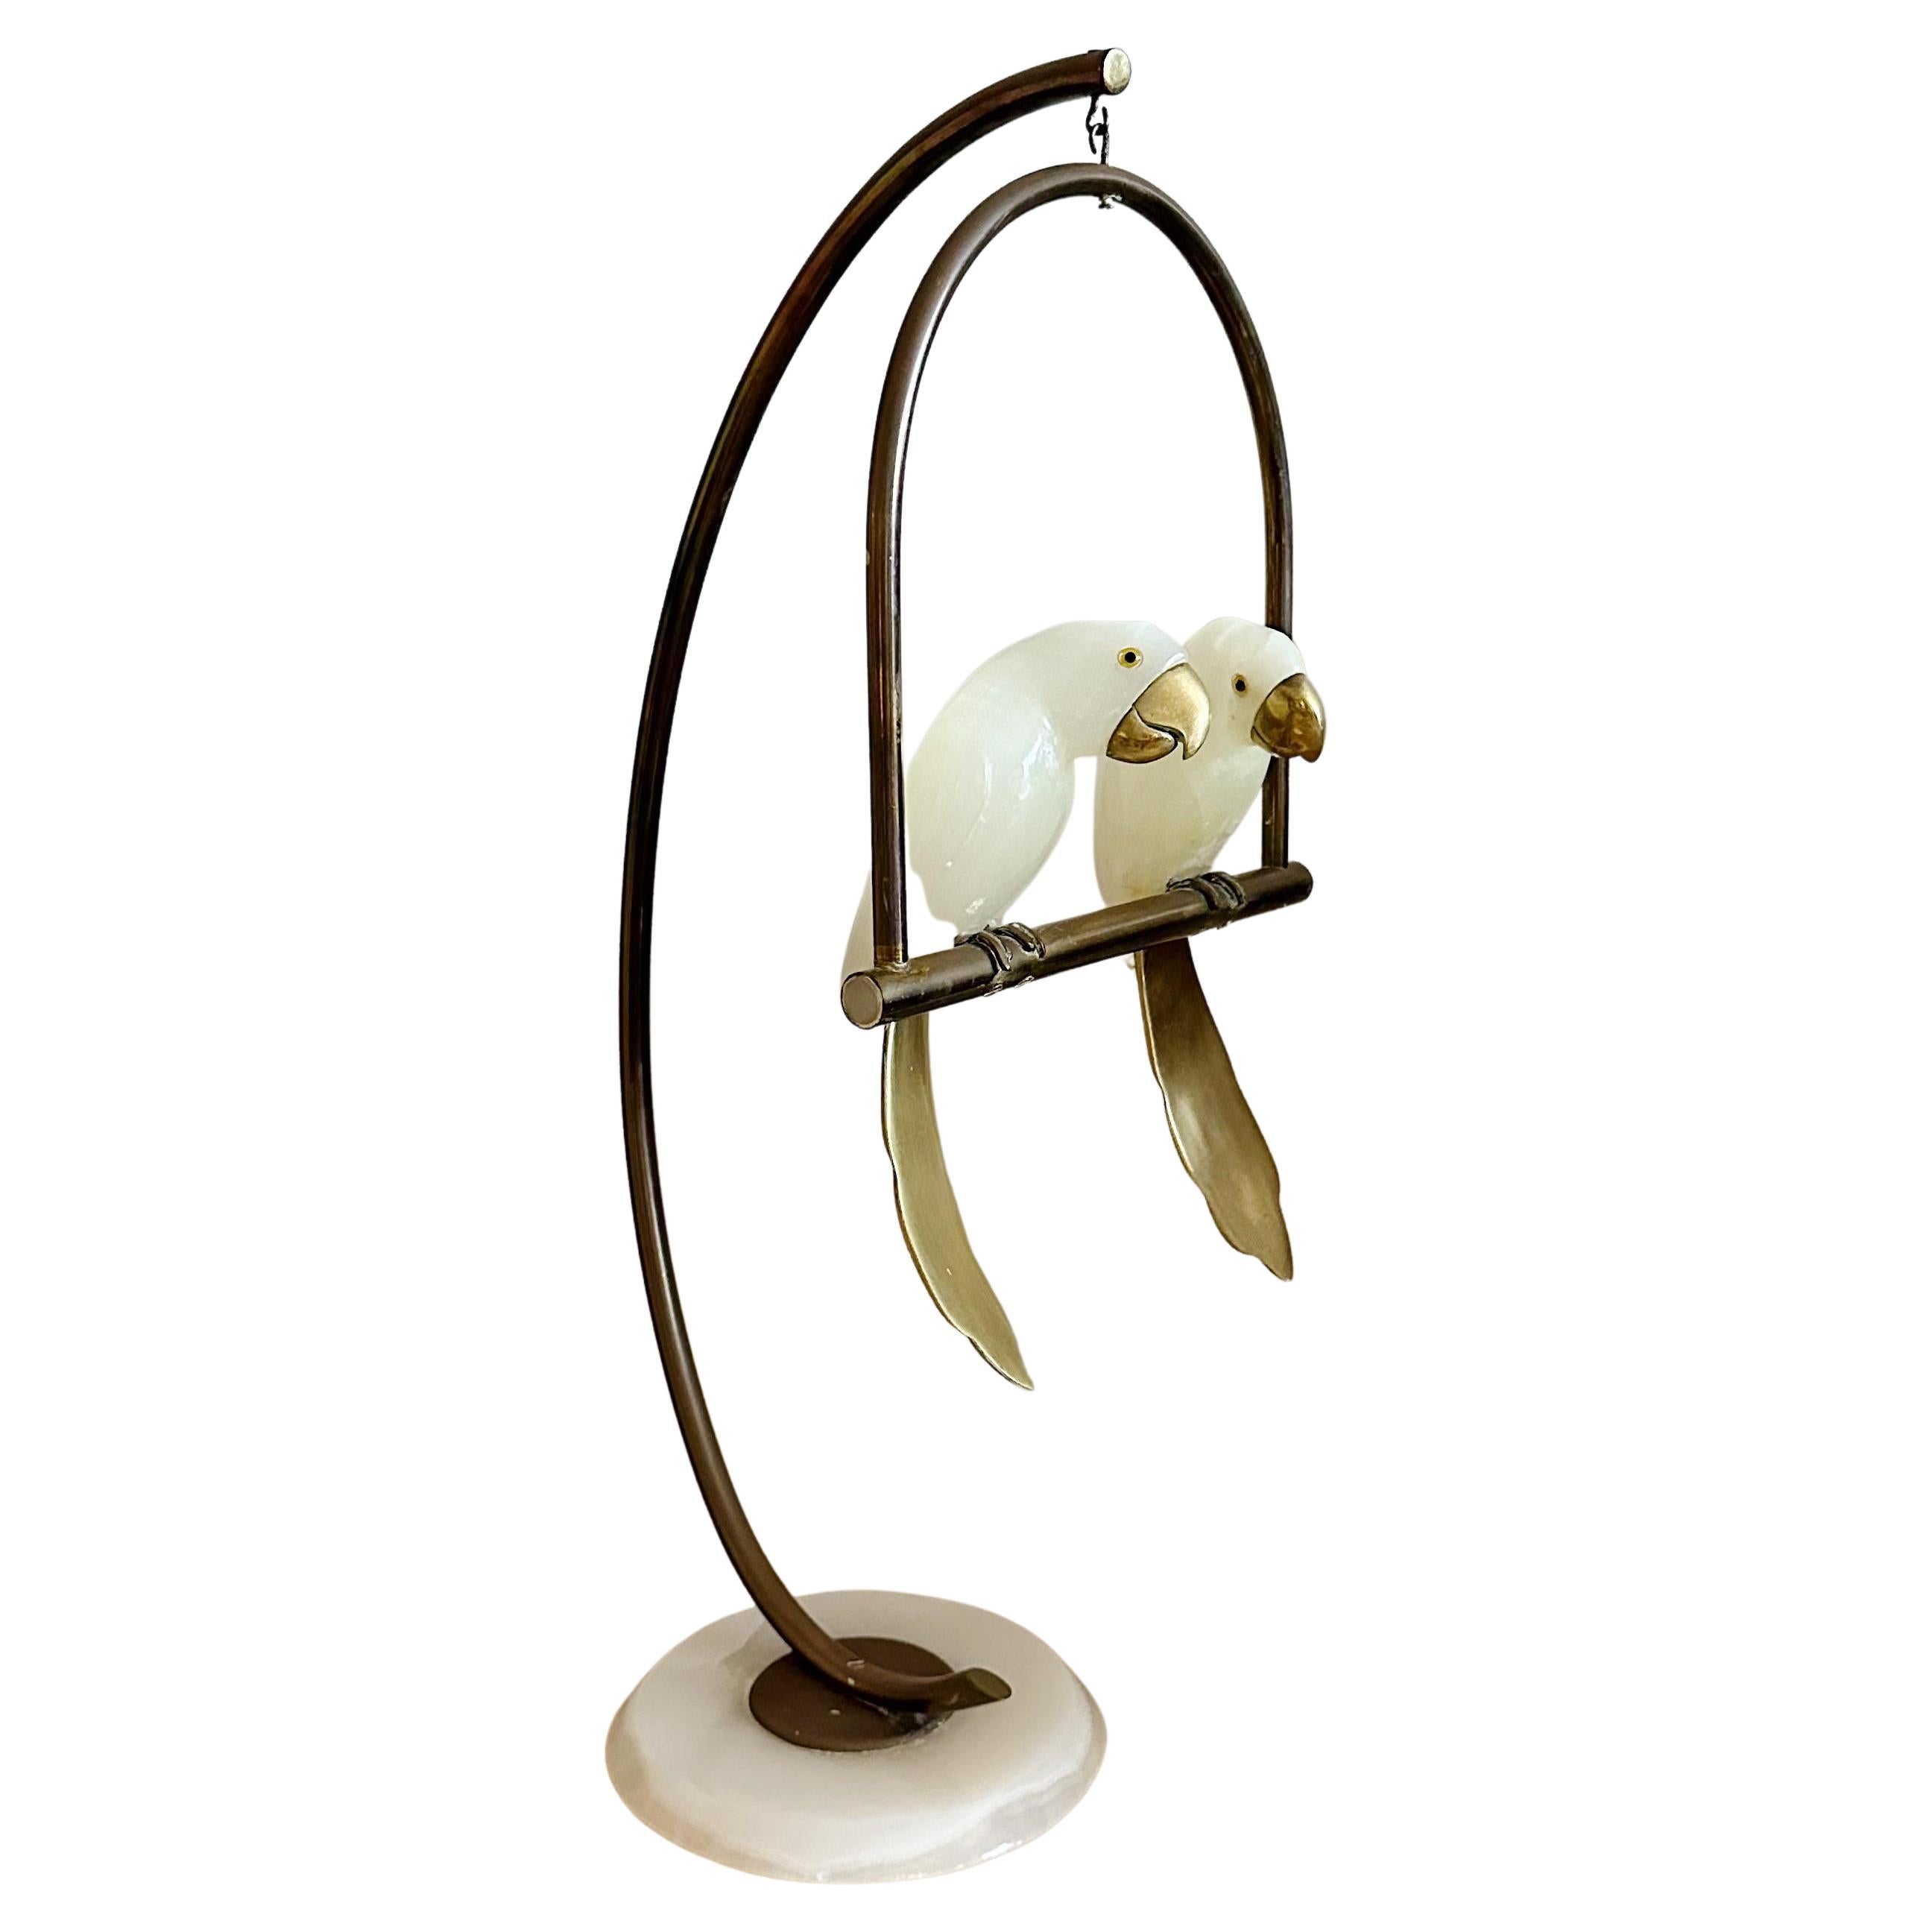 Pair of White Onyx Birds Perched on a Brass Swing Stand